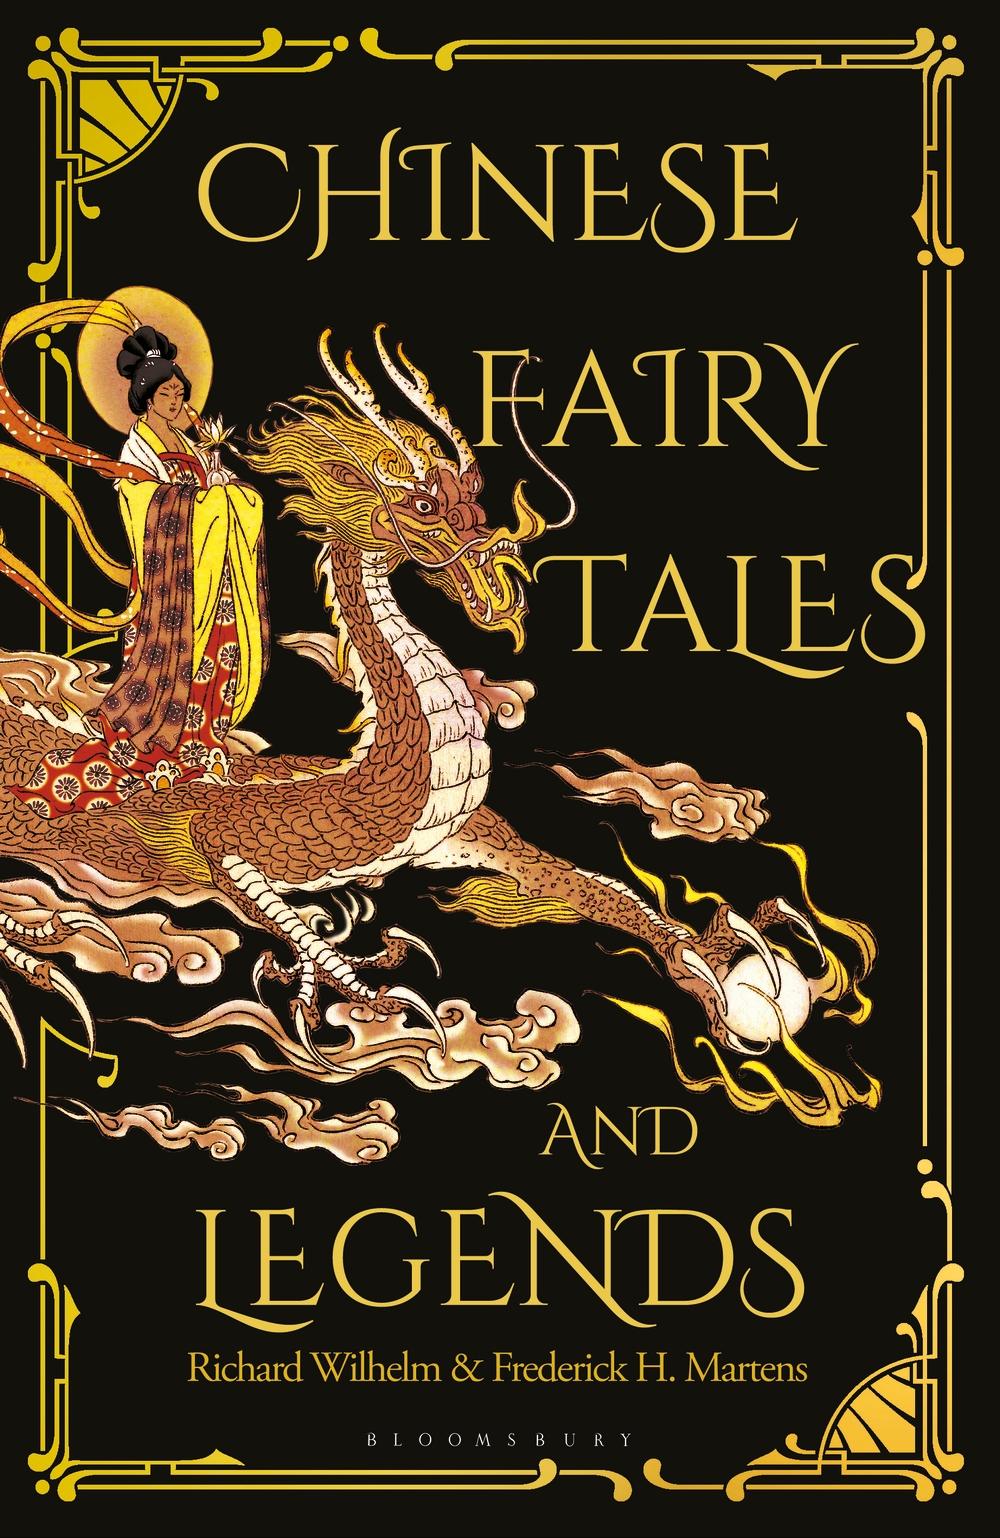 Chinese Fairy Tales and Legends - Richard Wilhelm